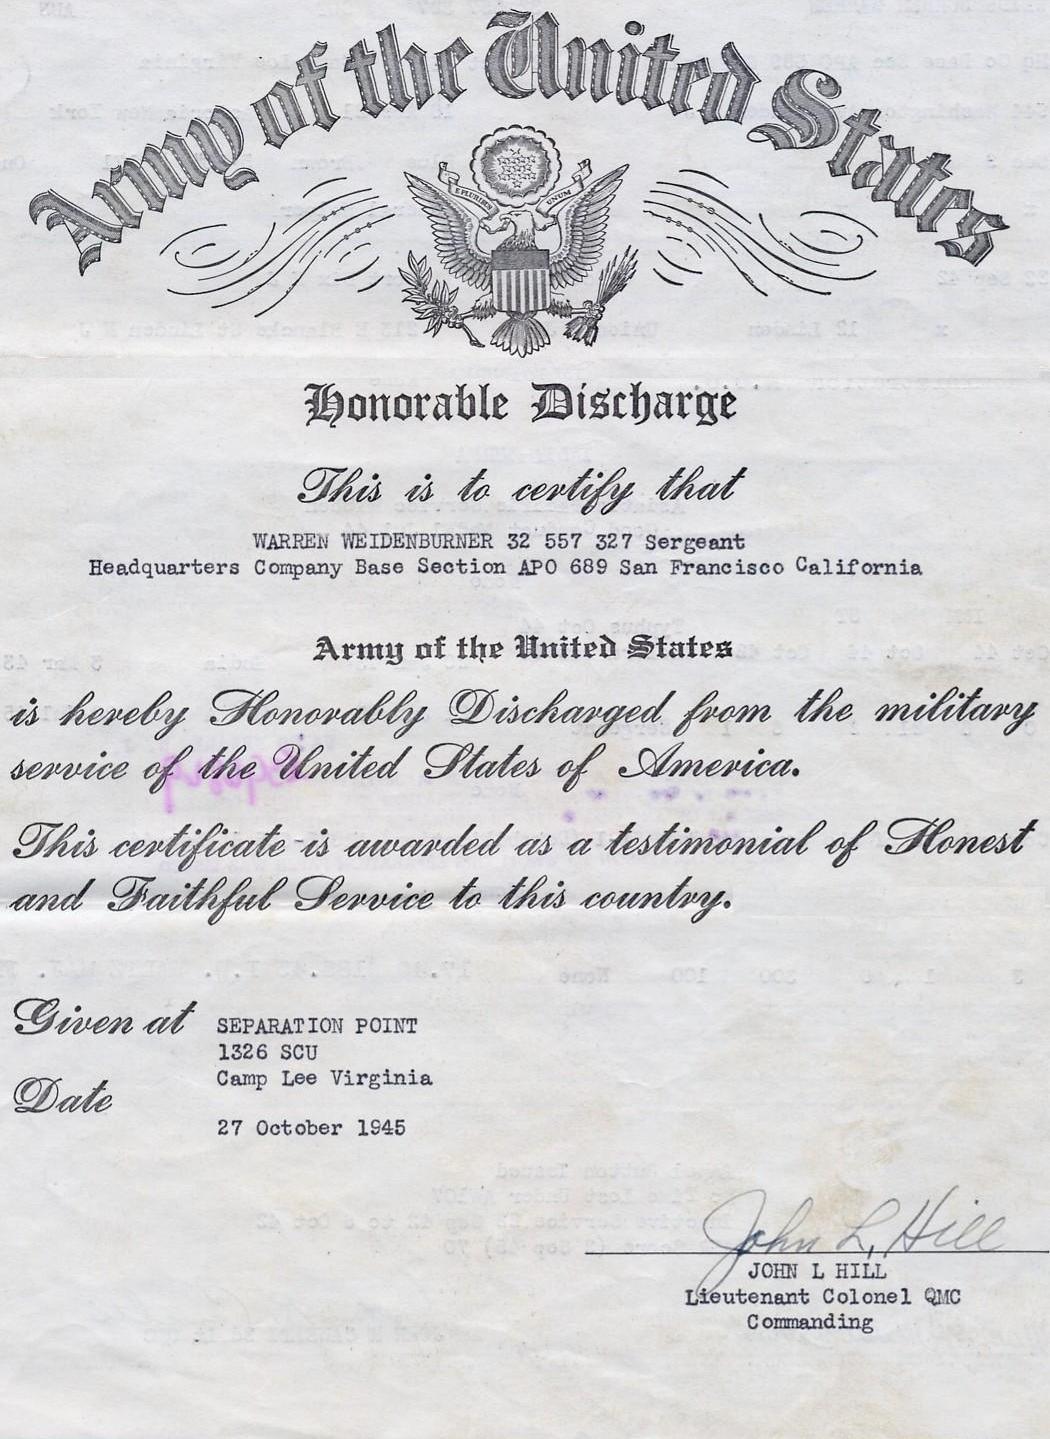  Honorable Discharge 